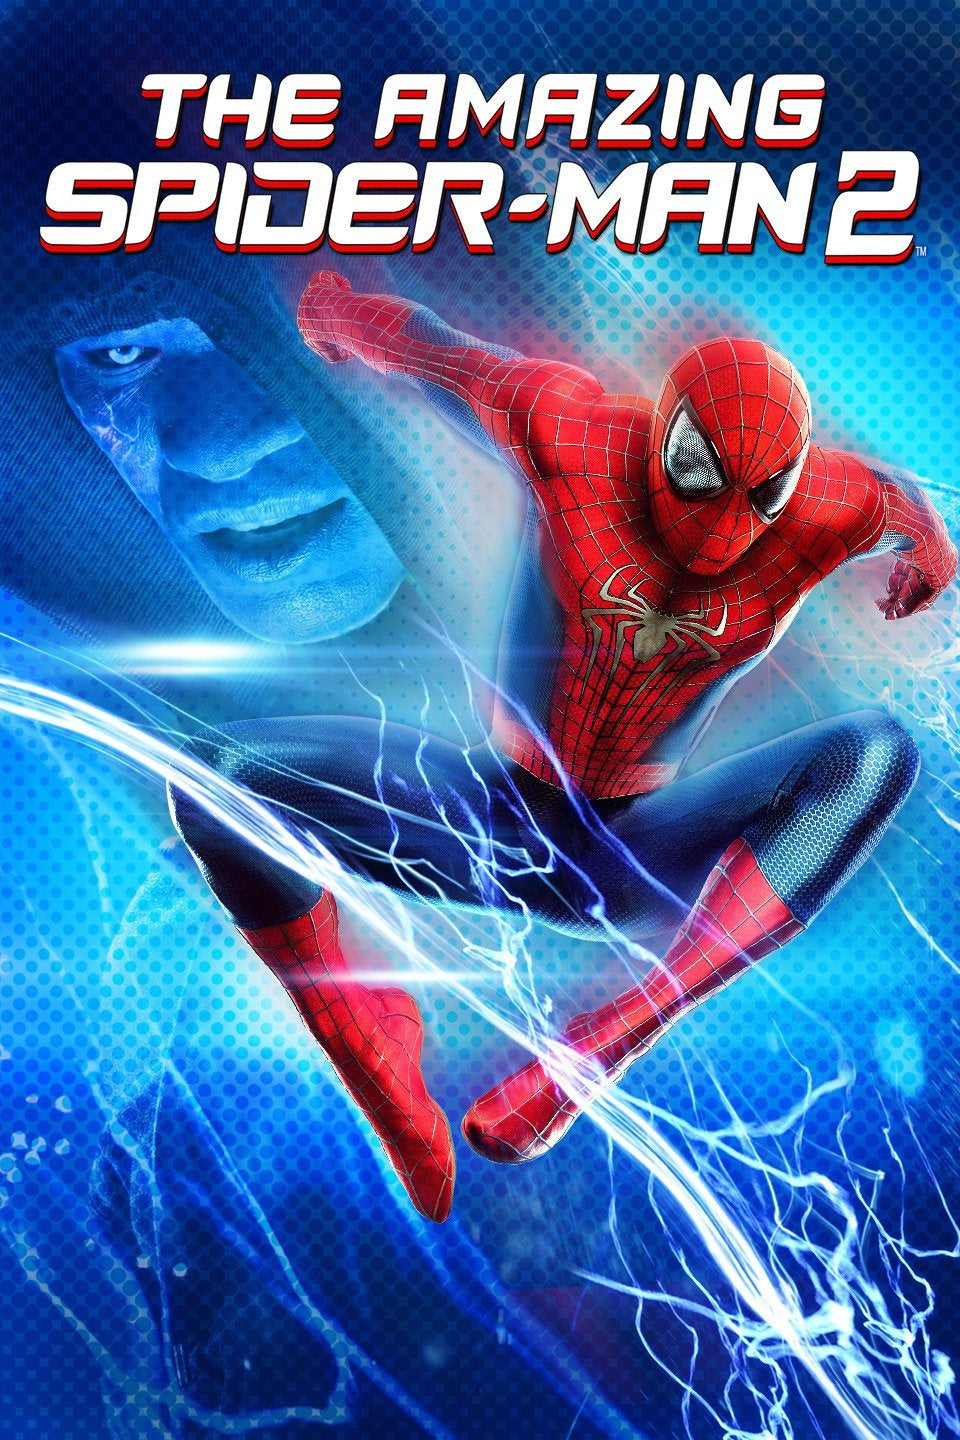 The Amazing Spider-Man 2 (2014) Vudu or Movies Anywhere HD code